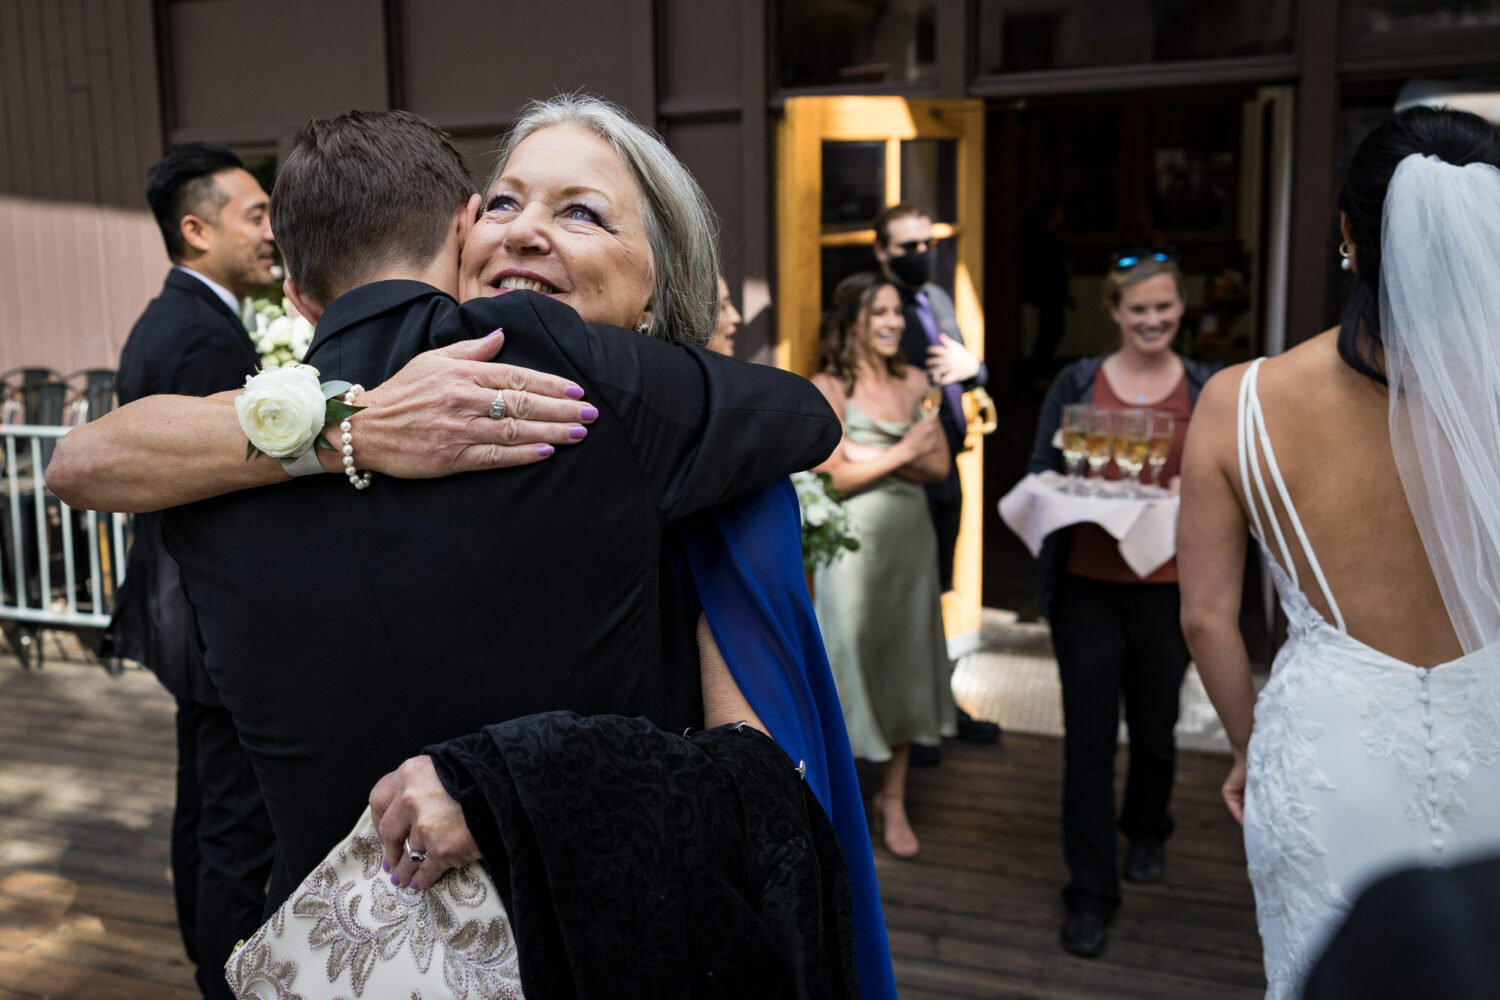 Congratulatory hugs from the mother of the groom wearing a corsage with a single white rose.